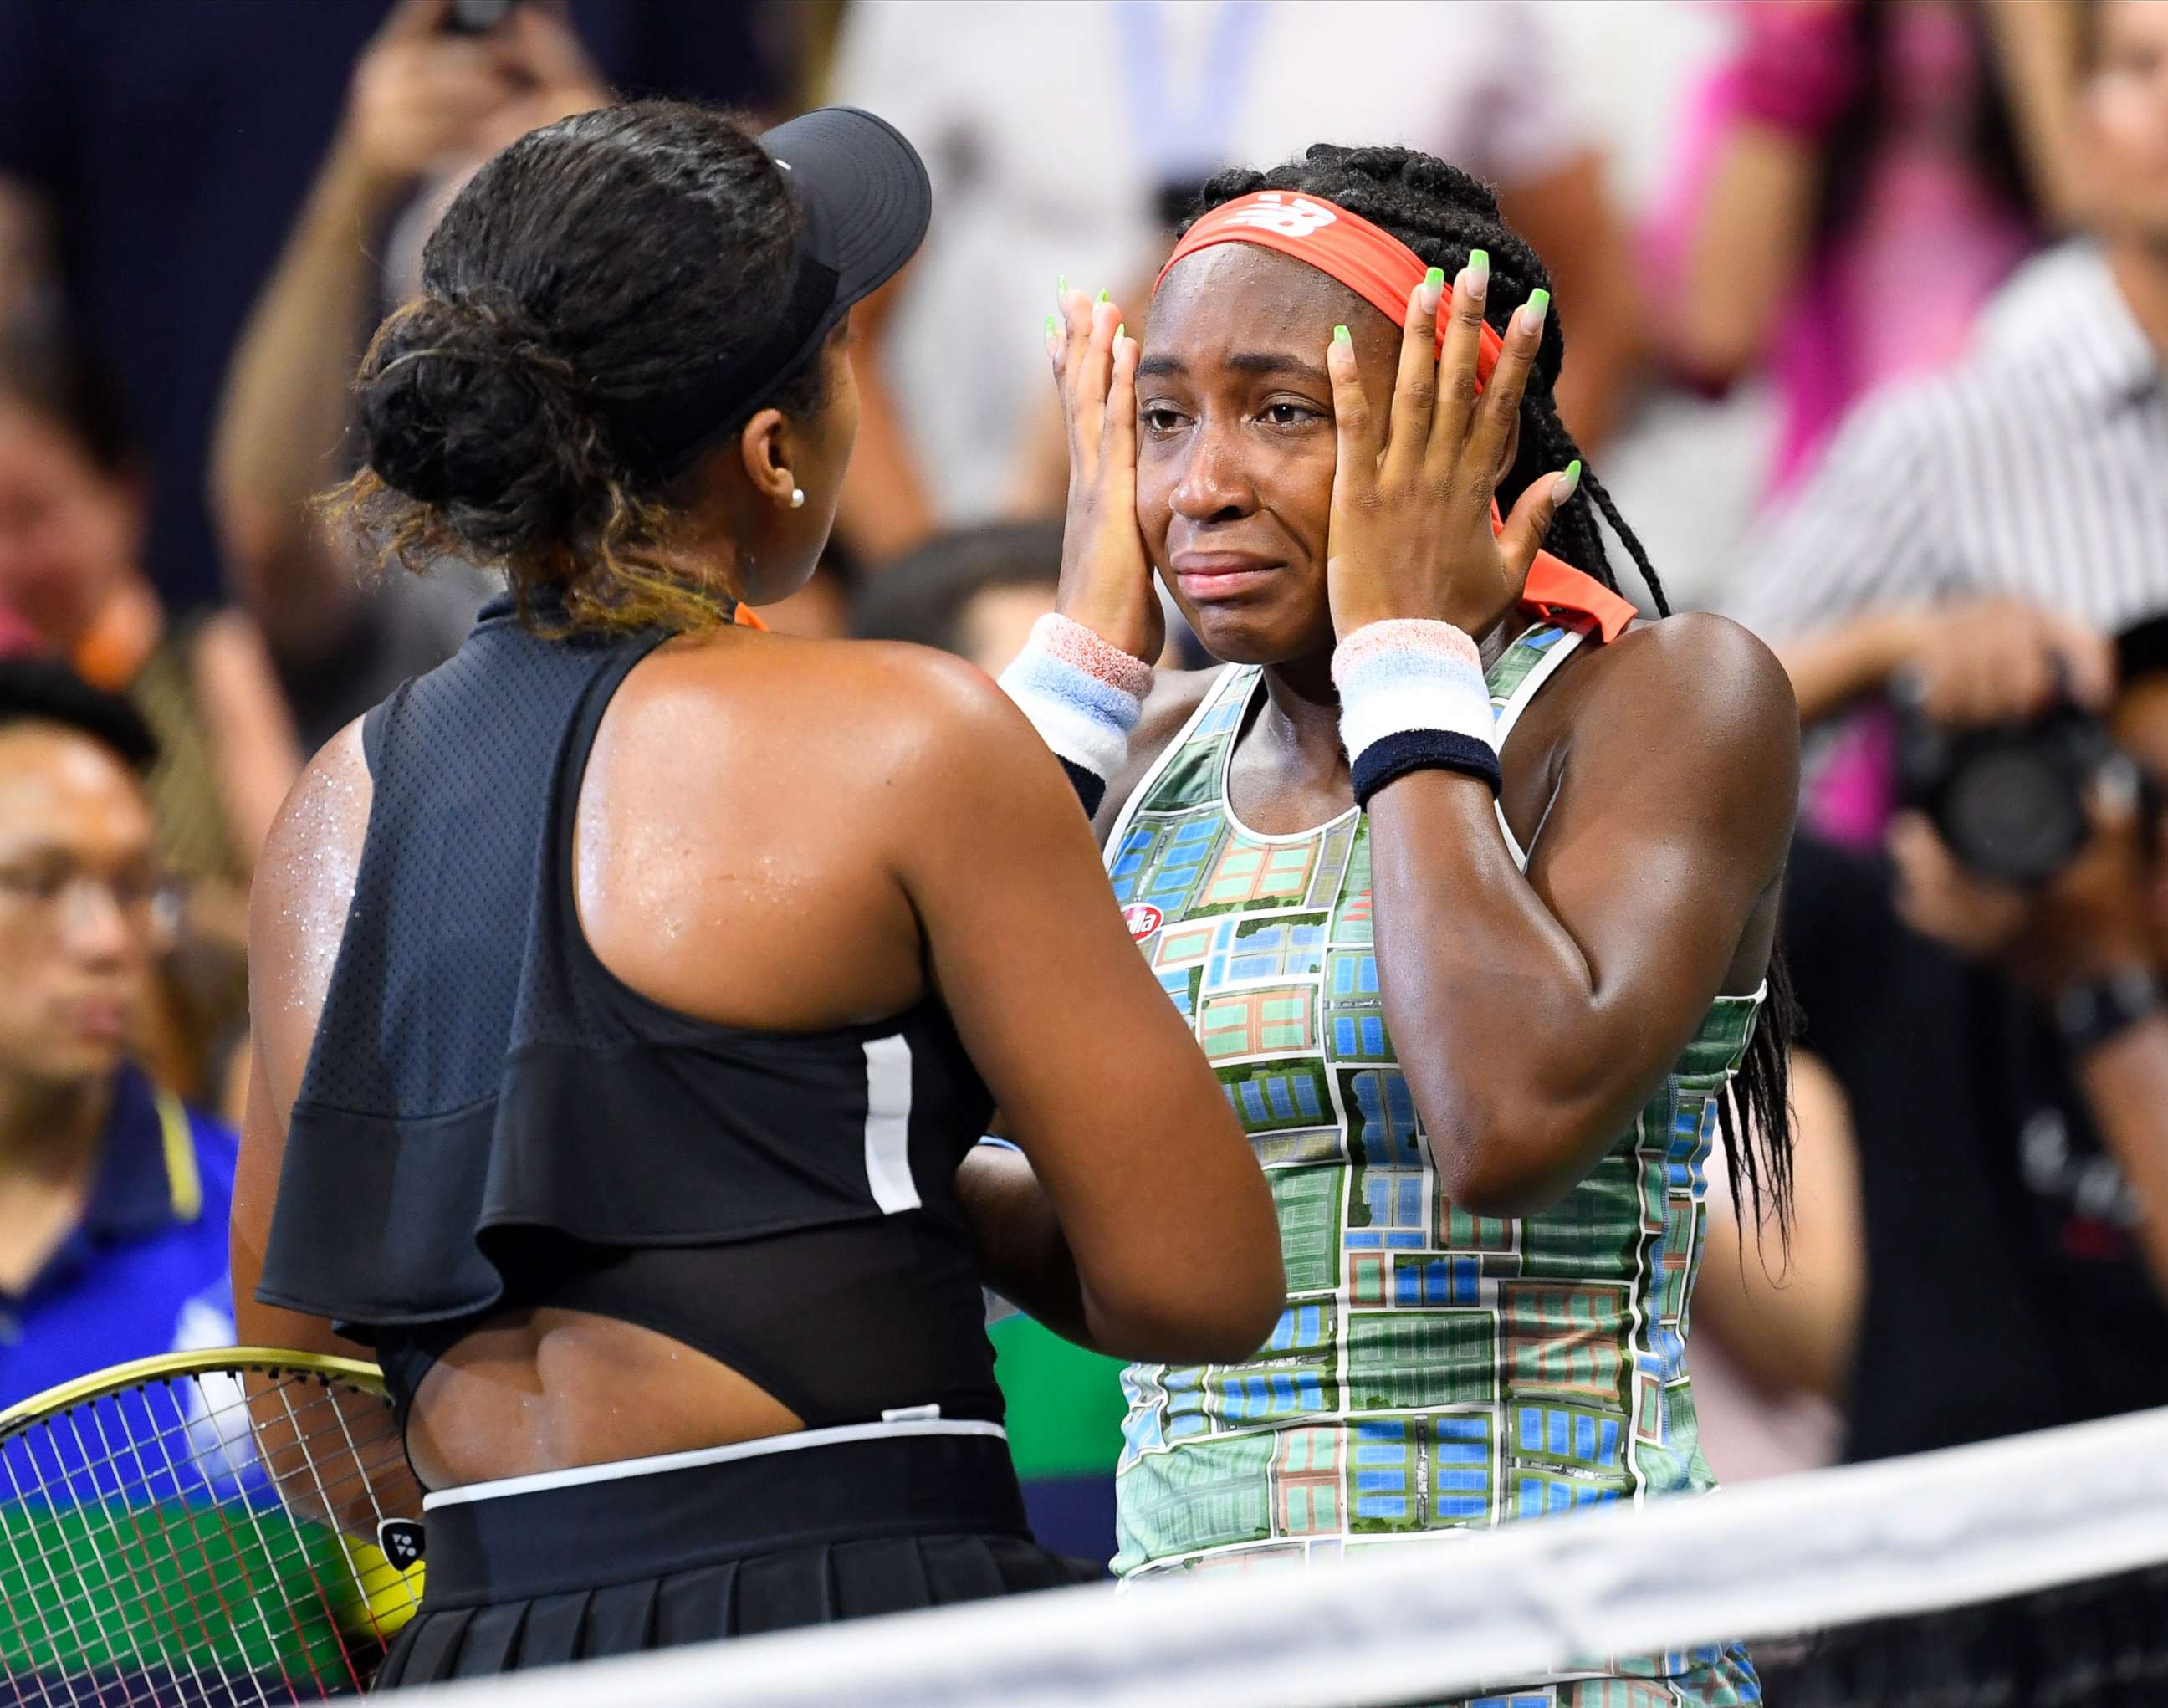 PHOTO: Naomi Osaka of Japan consoles Coco Gauff of the U.S. after their third round match on day six of the 2019 U.S. Open tennis tournament at USTA Billie Jean King National Tennis Center in Flushing, New York, Aug. 31, 2019.